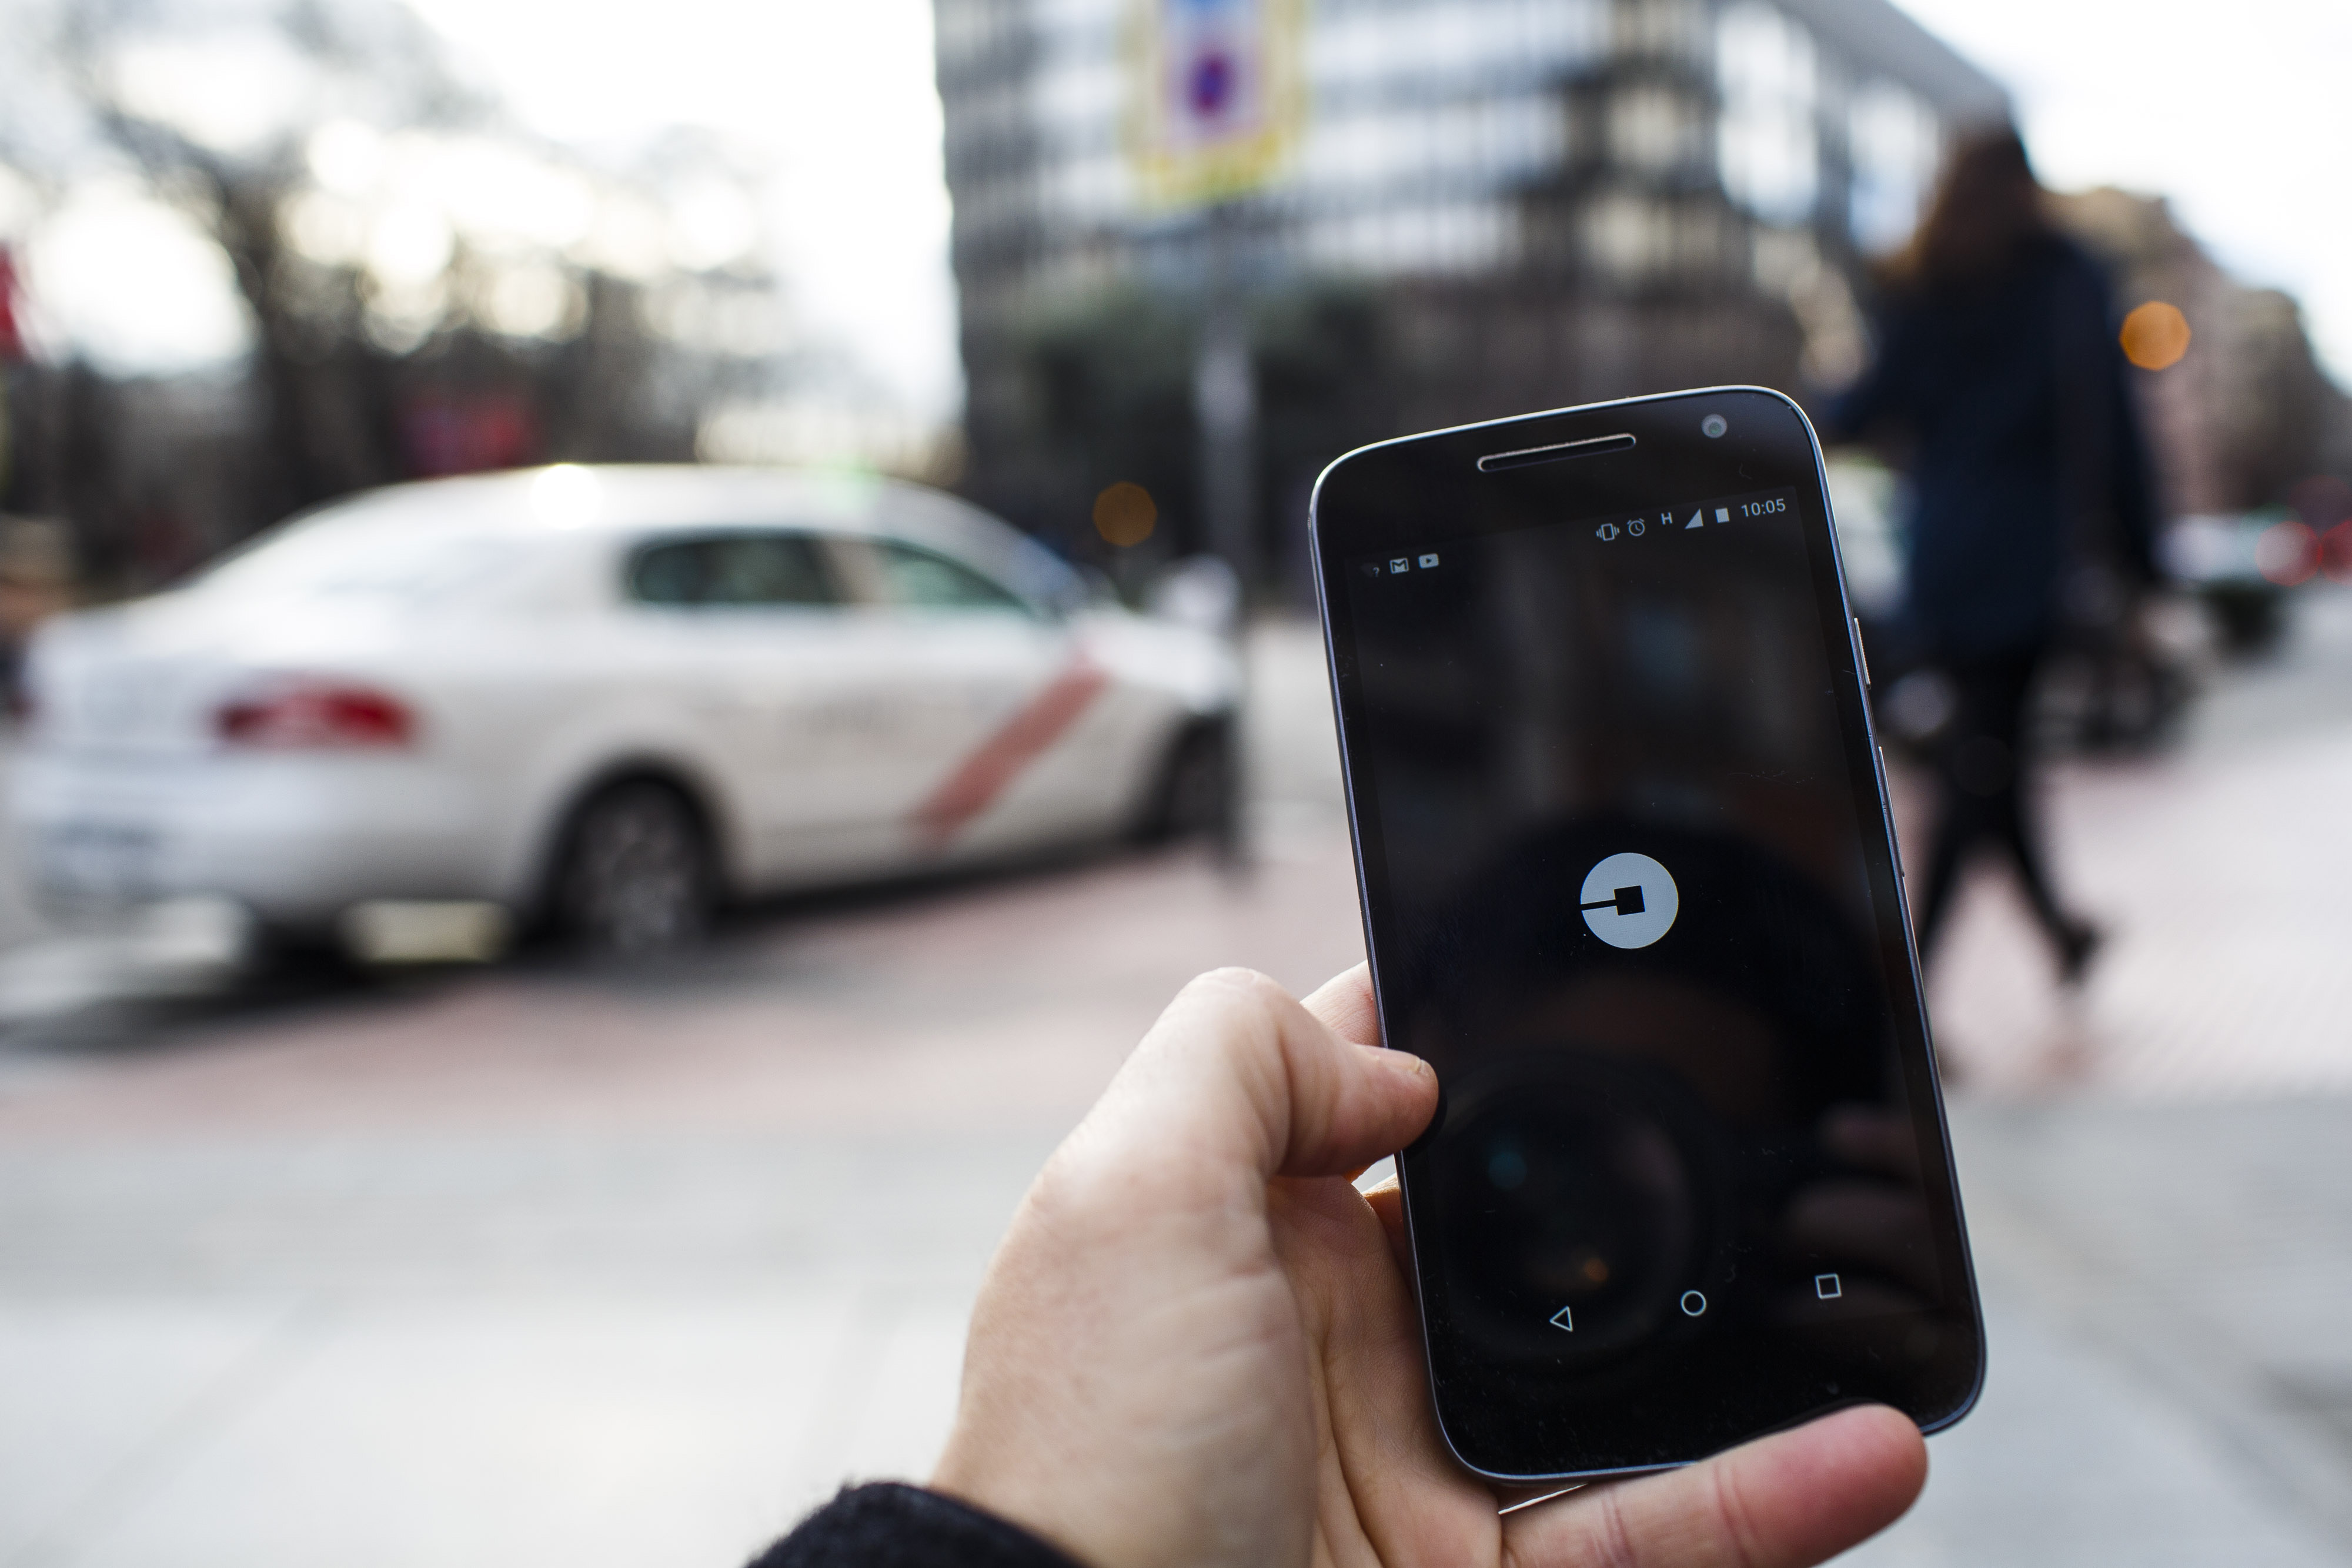 The Uber Technologies Inc. ride-hailing service smartphone app sits on a smartphone display. (Bloomberg&mdash;Bloomberg via Getty Images)